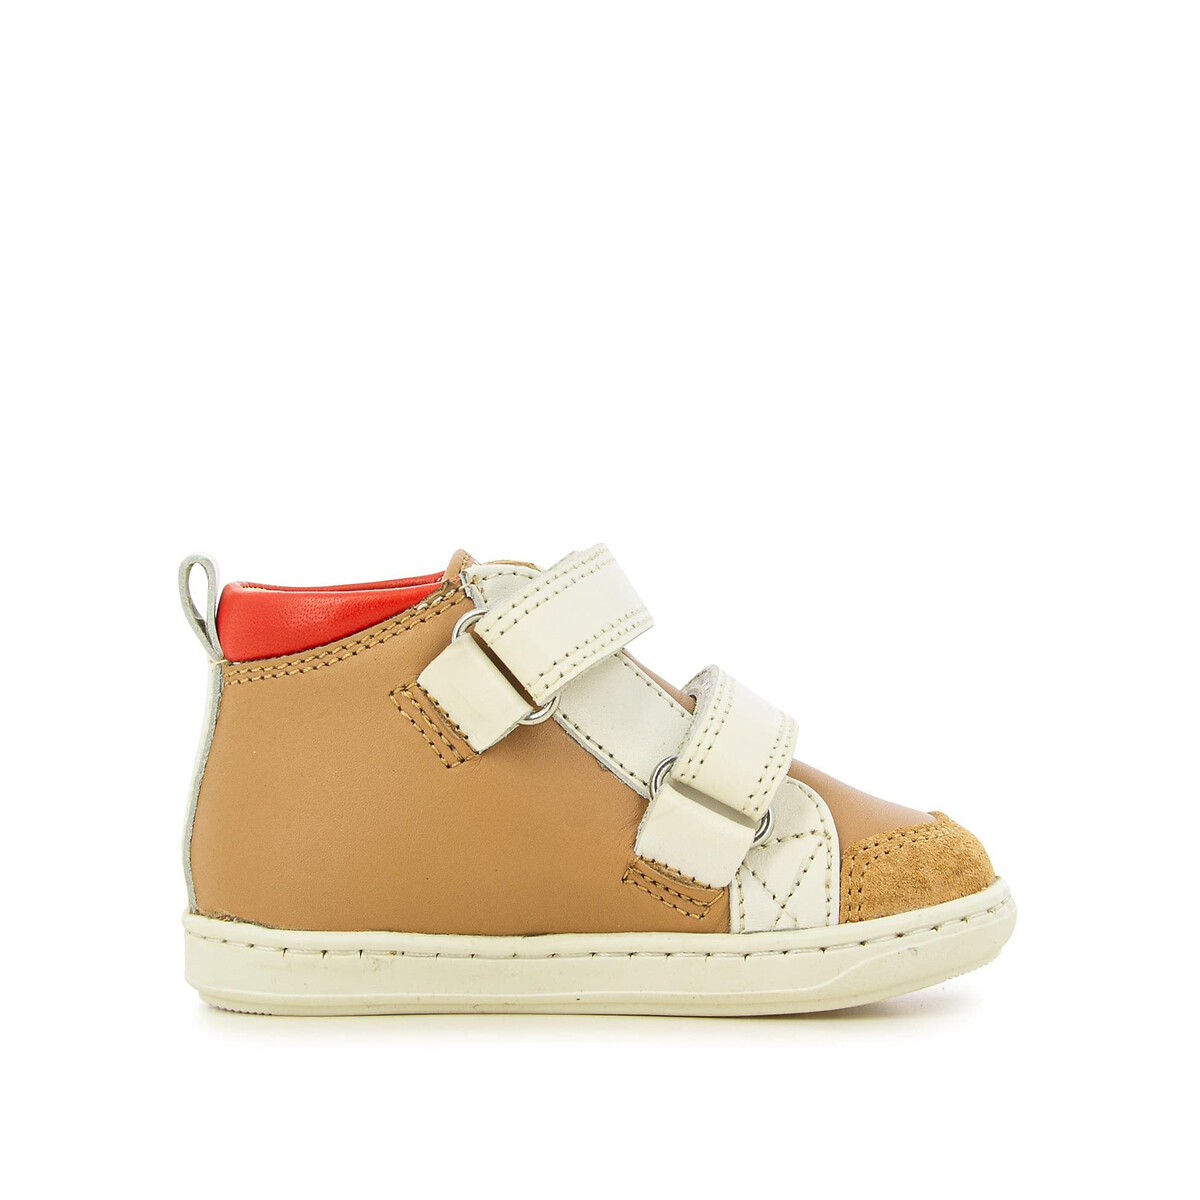 Kids Bouba New Scratch High Top Trainers in Leather